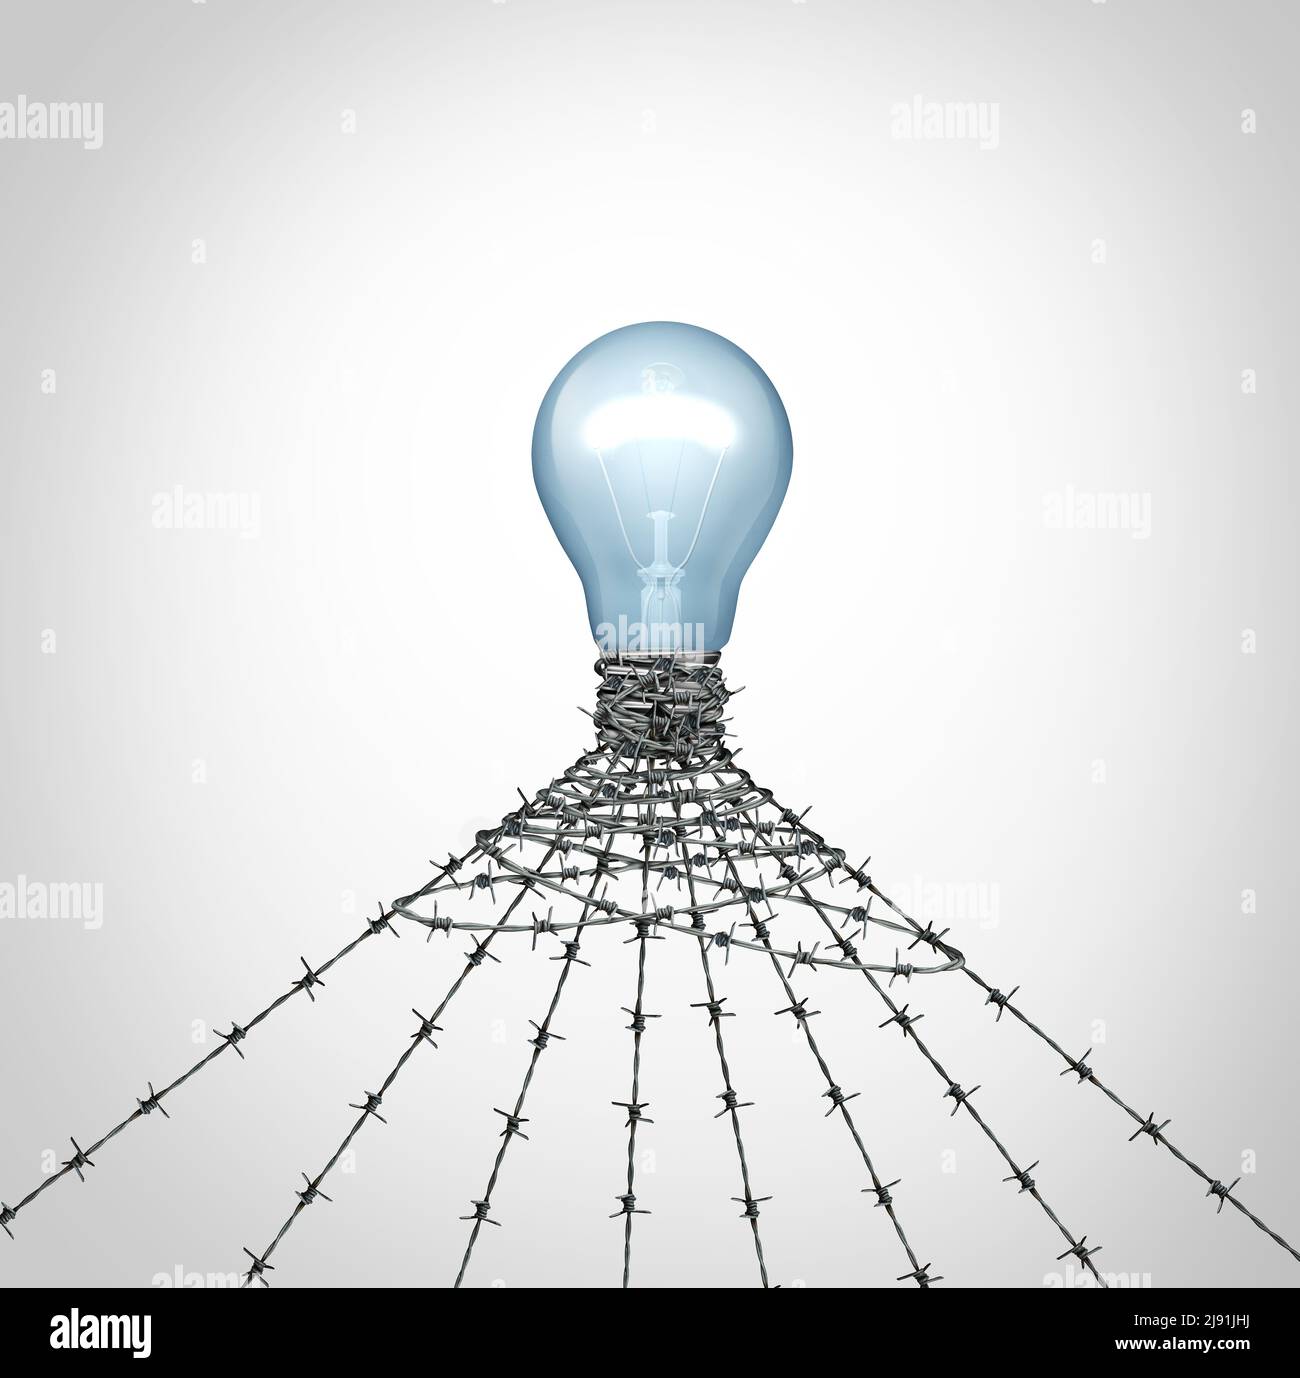 Intellectual Property Protection and IP security and creative law  metaphor as a light bulb wrapped in protective barbed wire with 3D illustration. Stock Photo